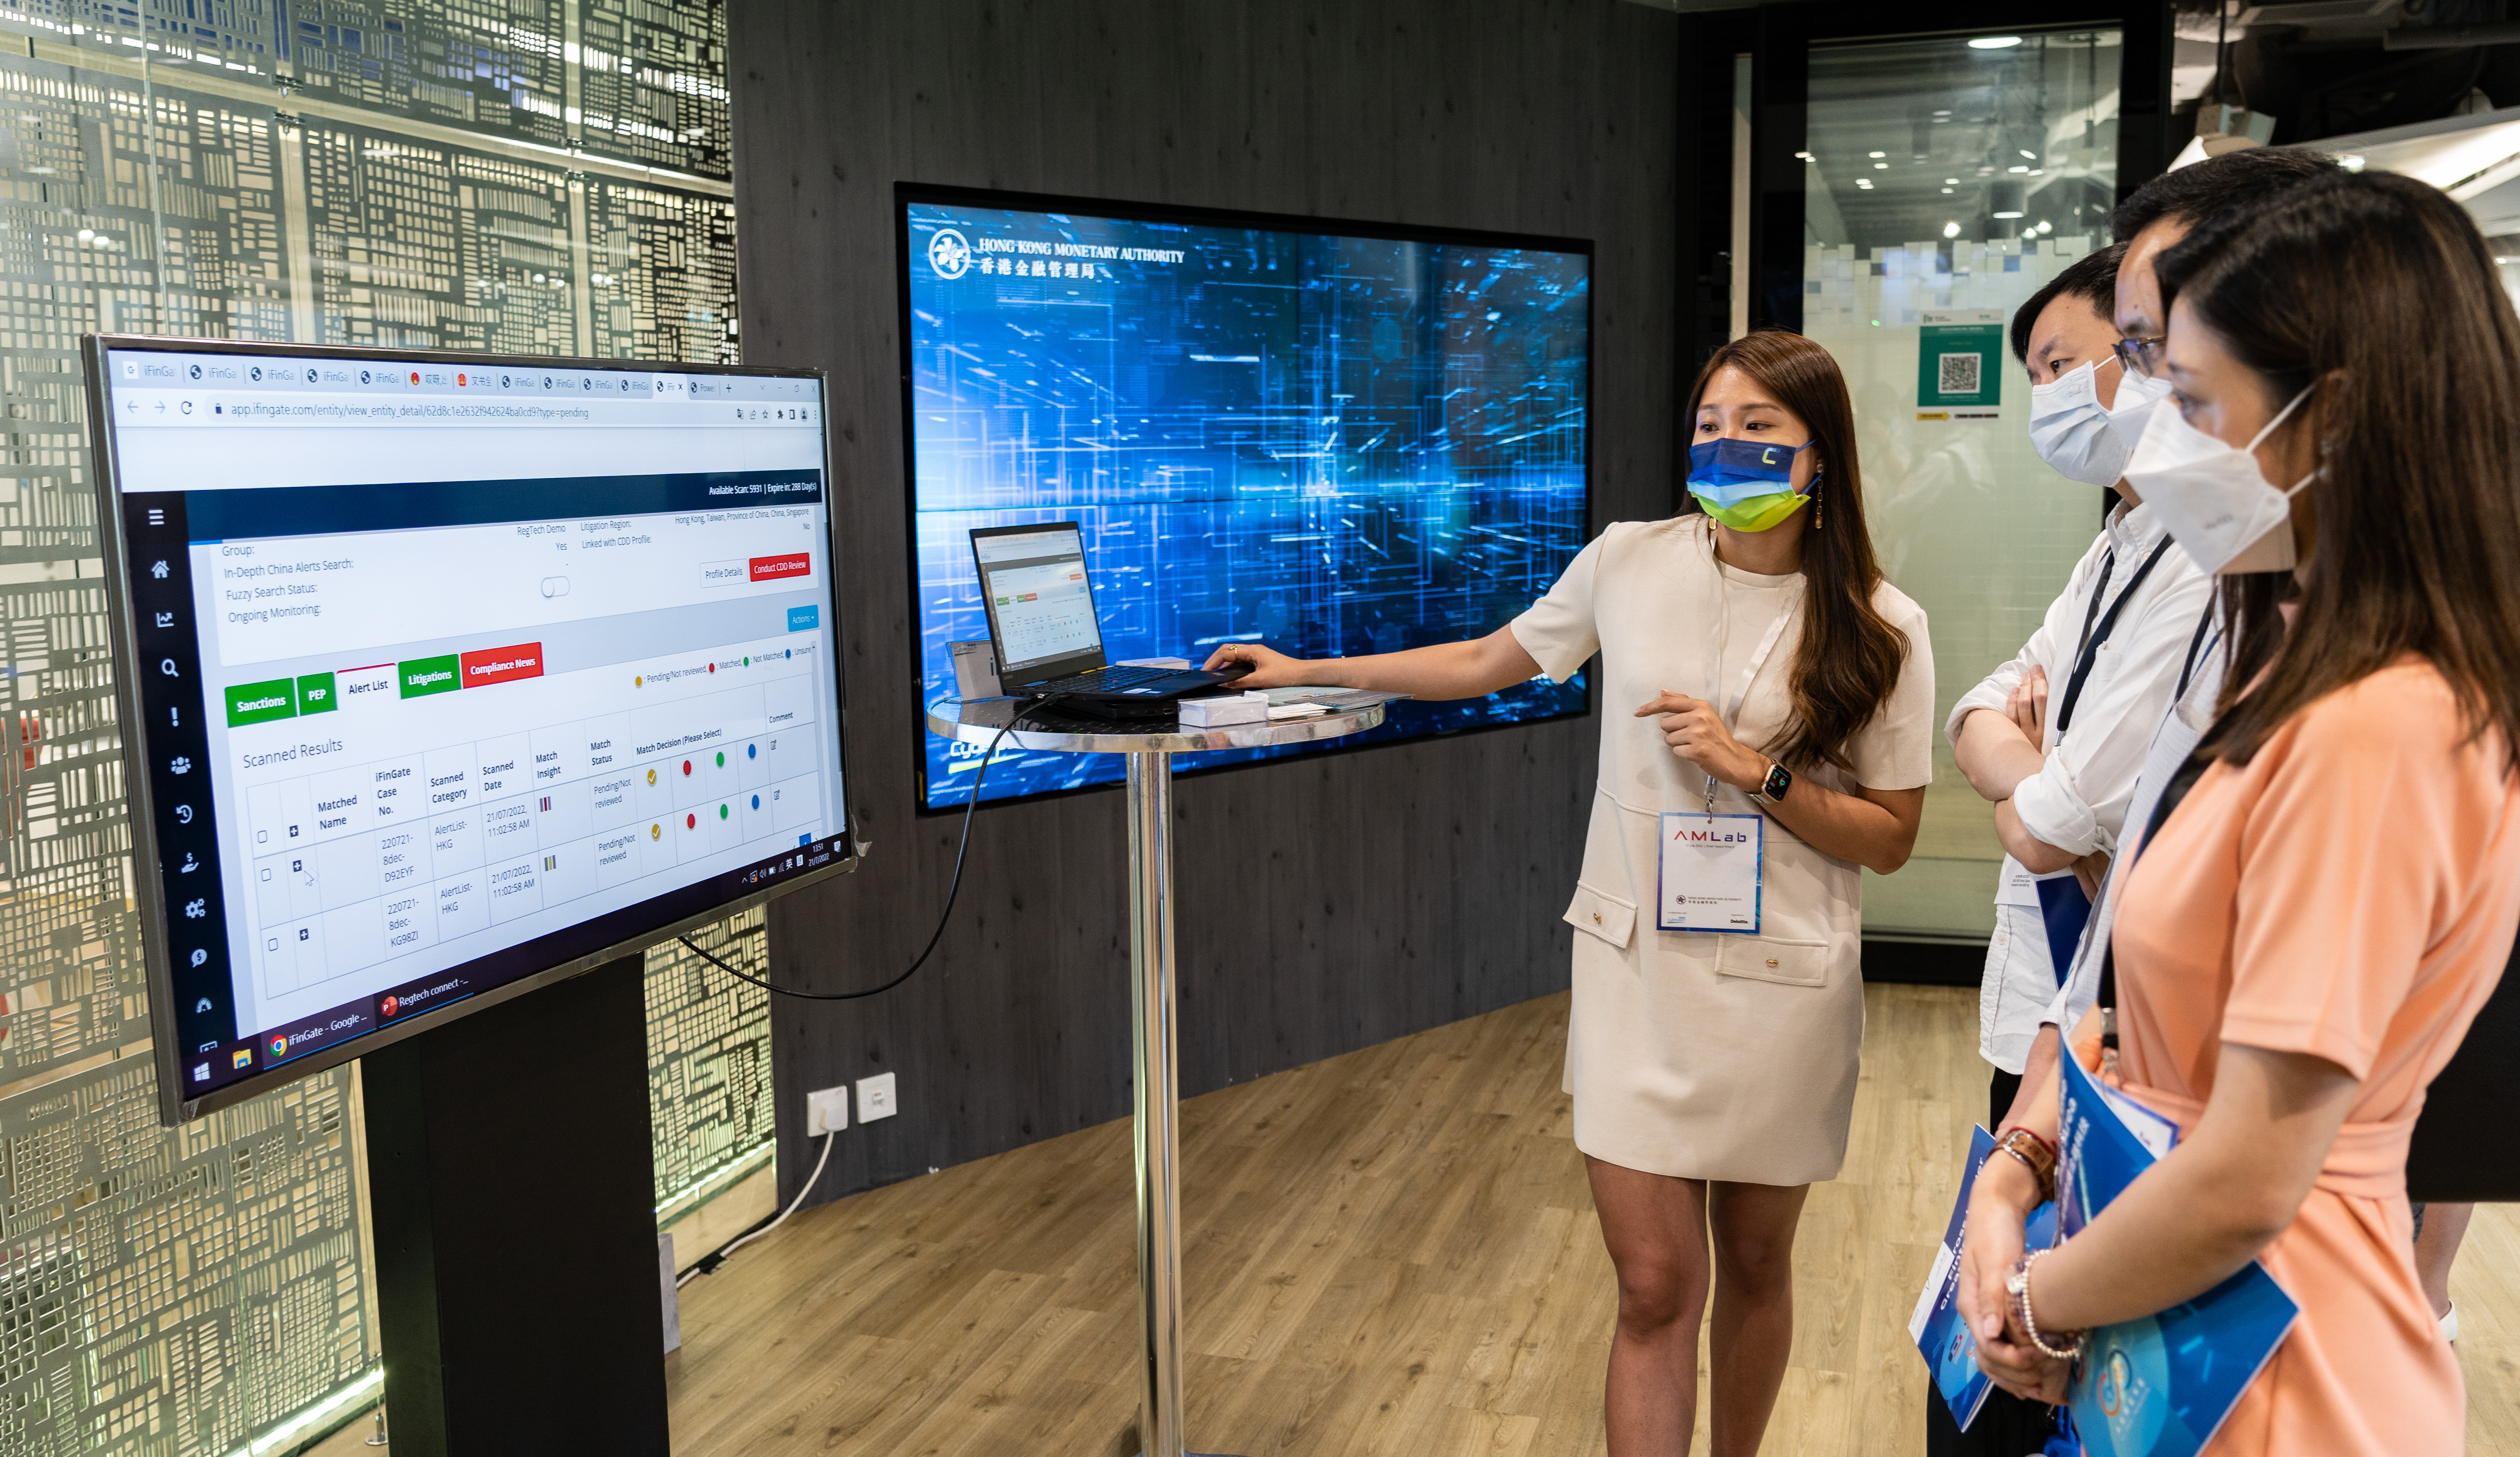 Technology companies in Cyberport demonstrate a range of tools and services and connect with participating banks.